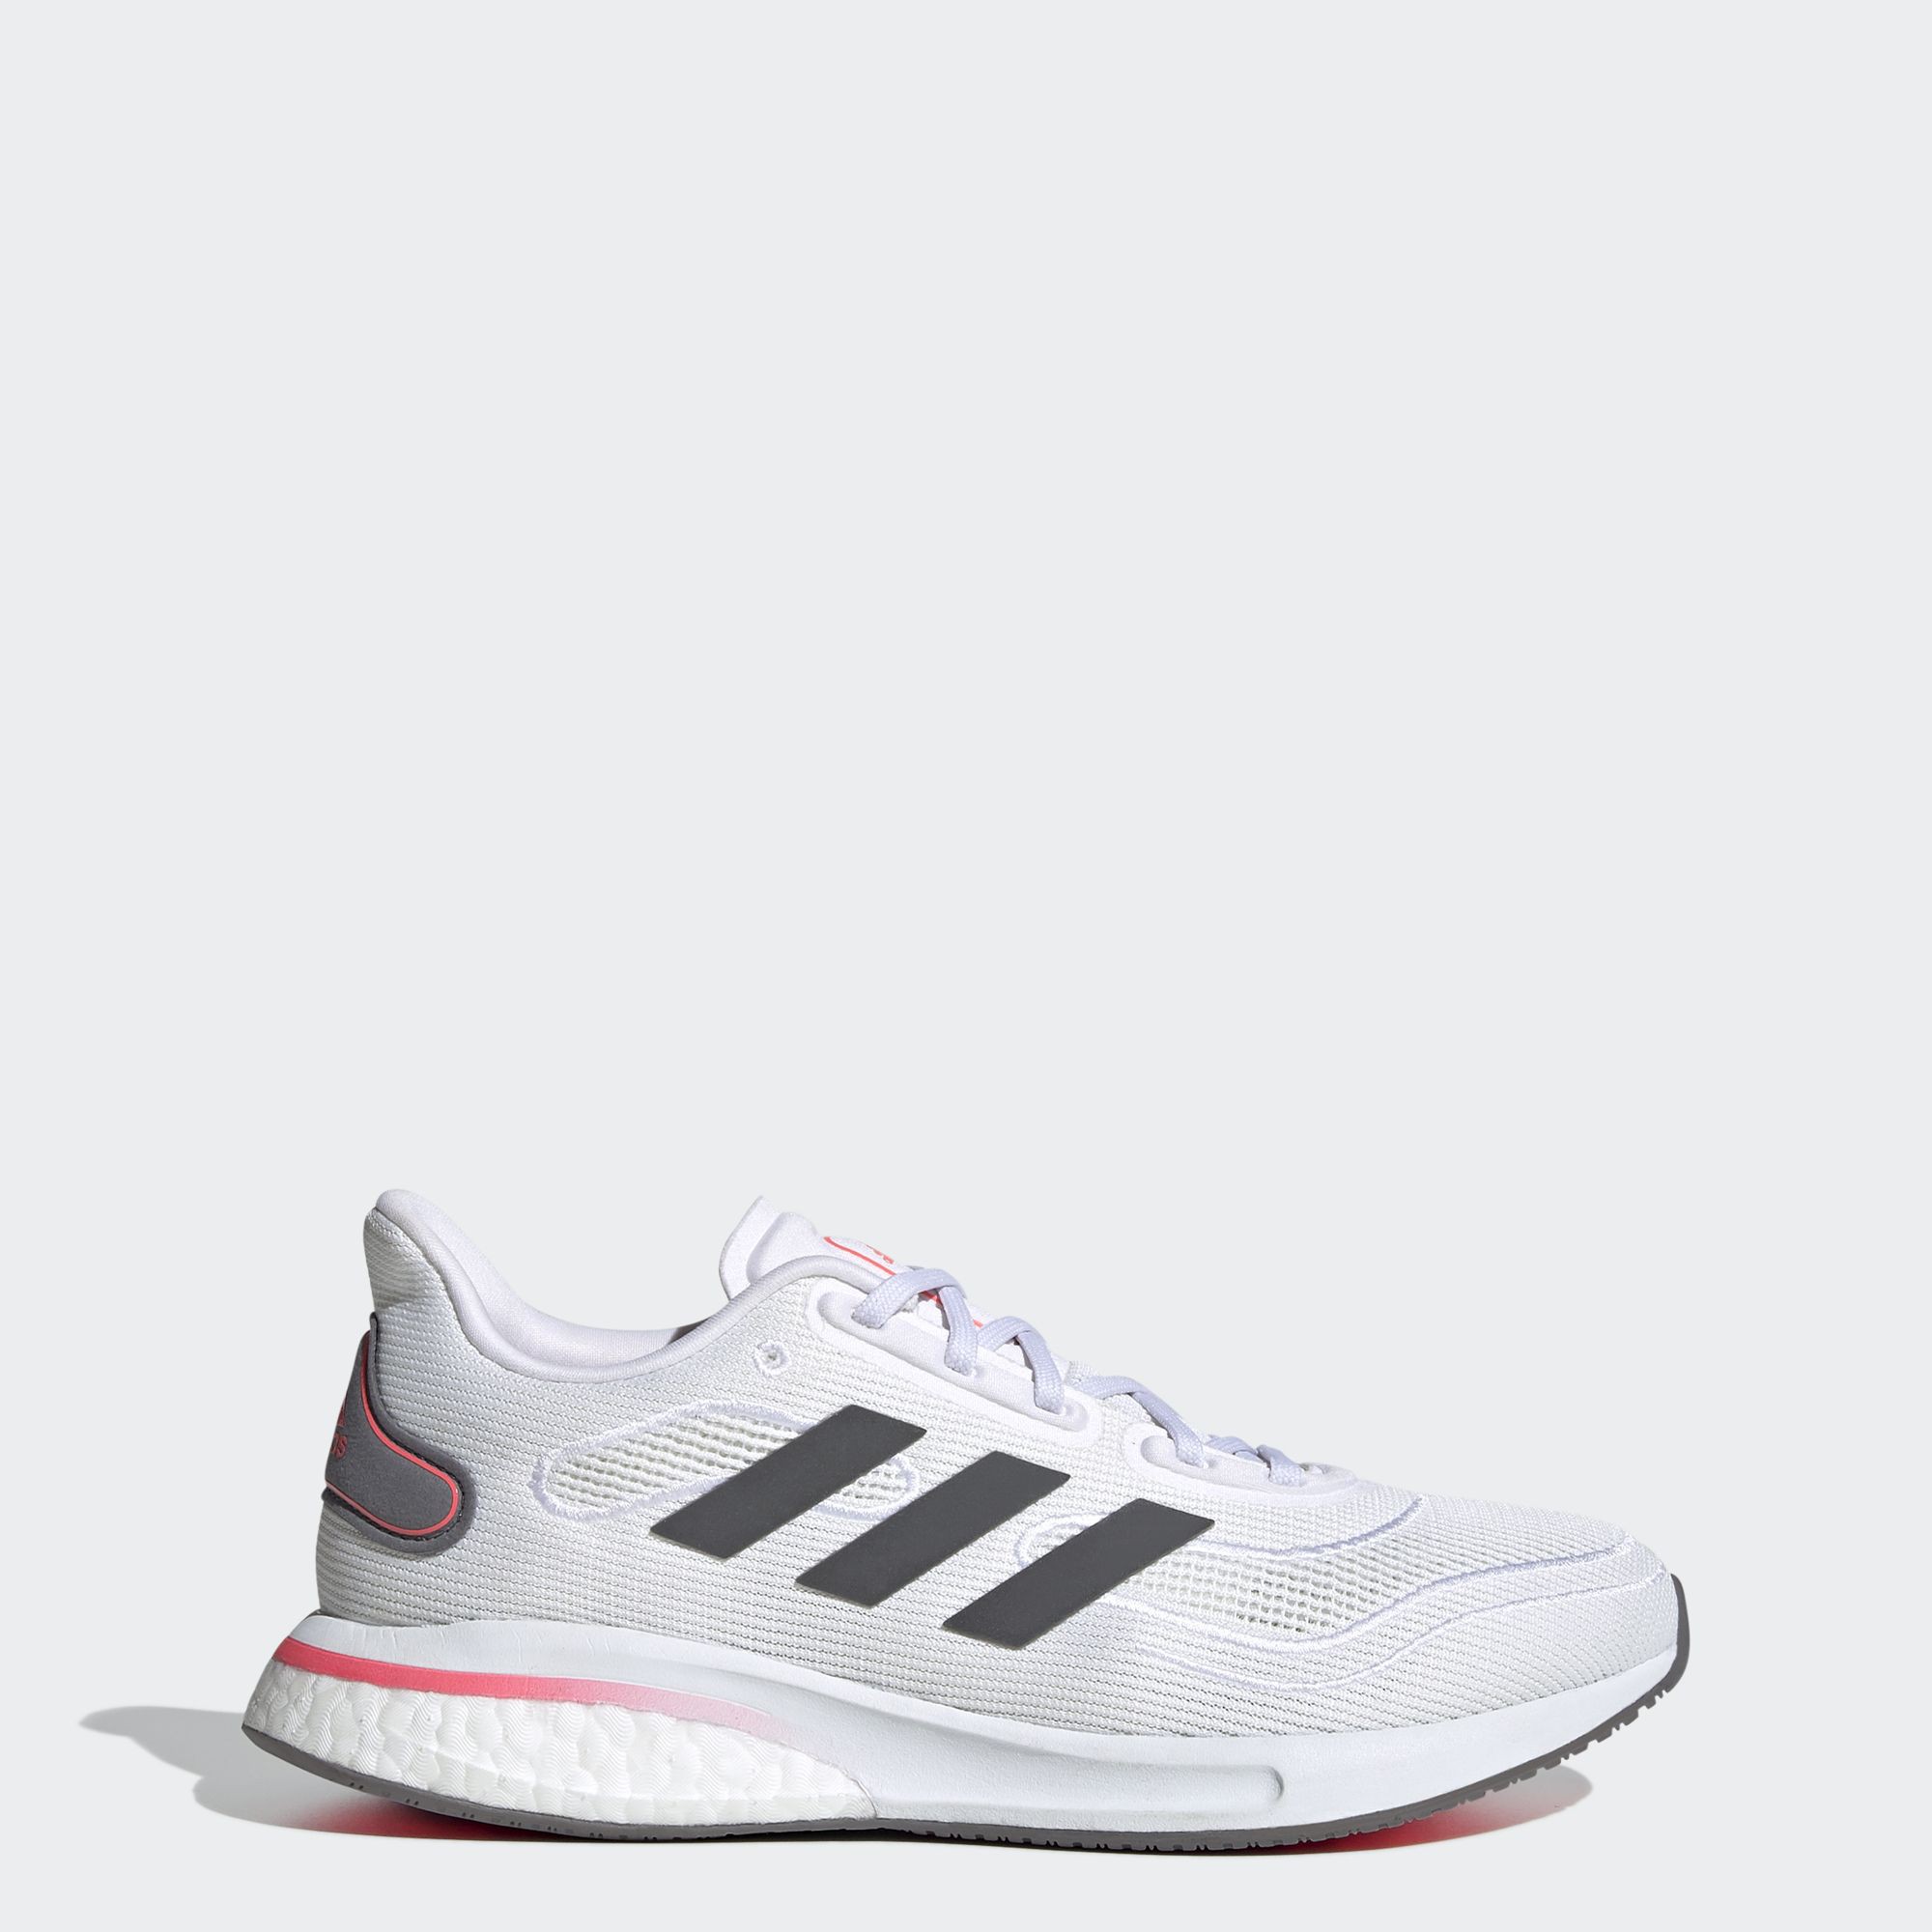 official store adidas di shopee